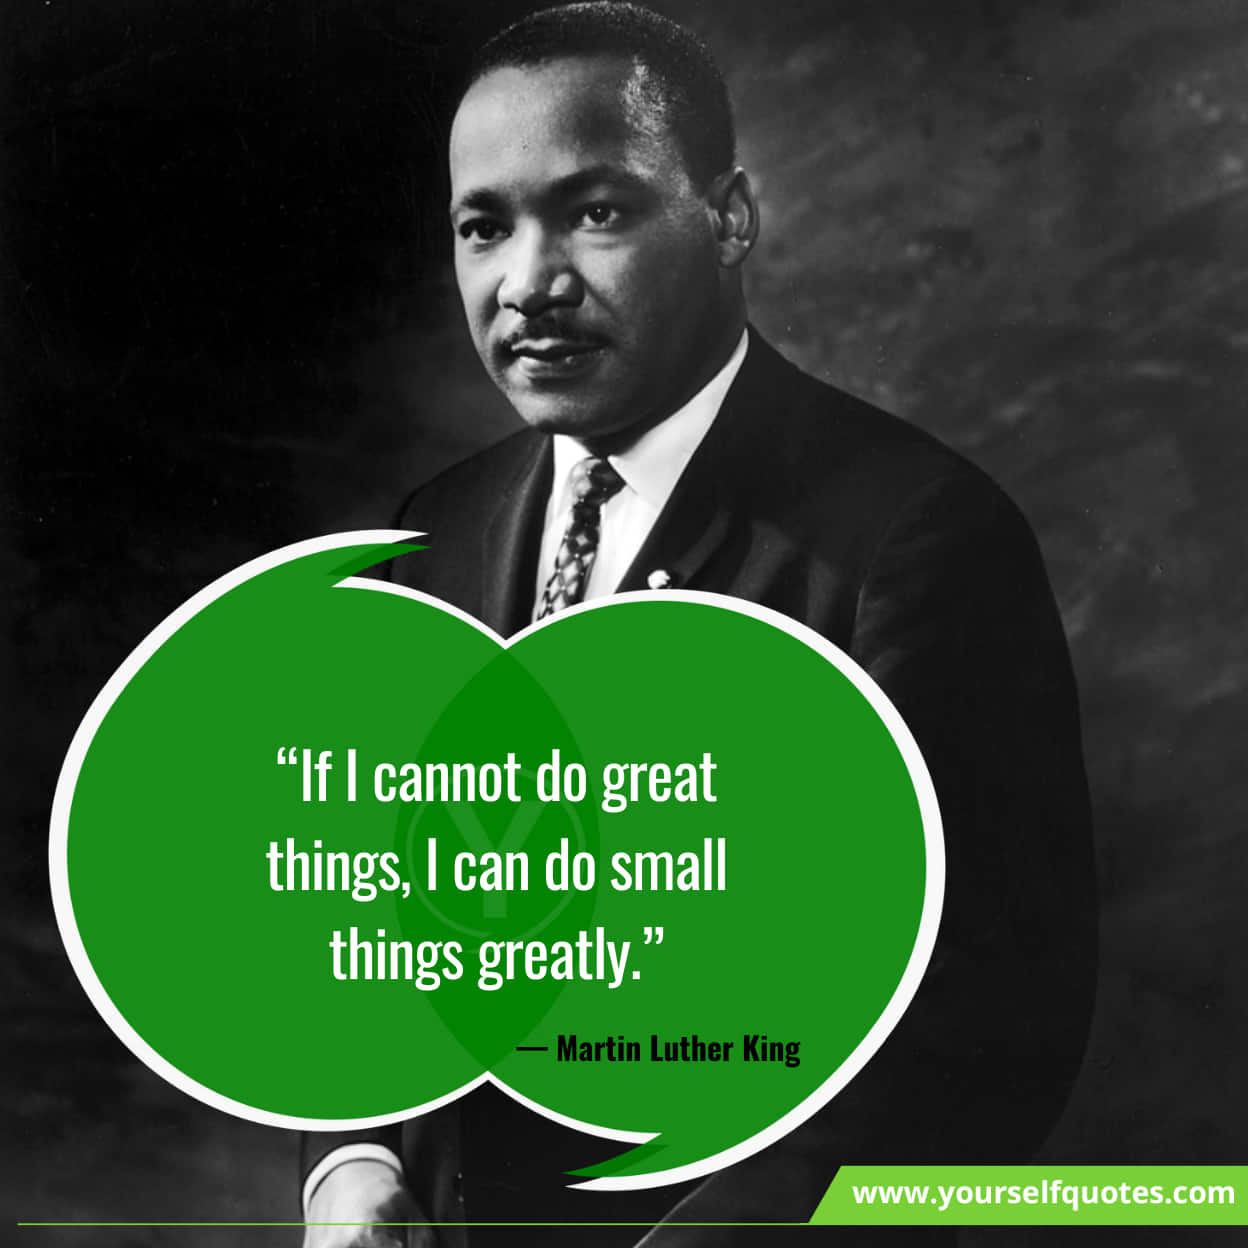 Inspirational Martin Luther King, Jr. Quotes